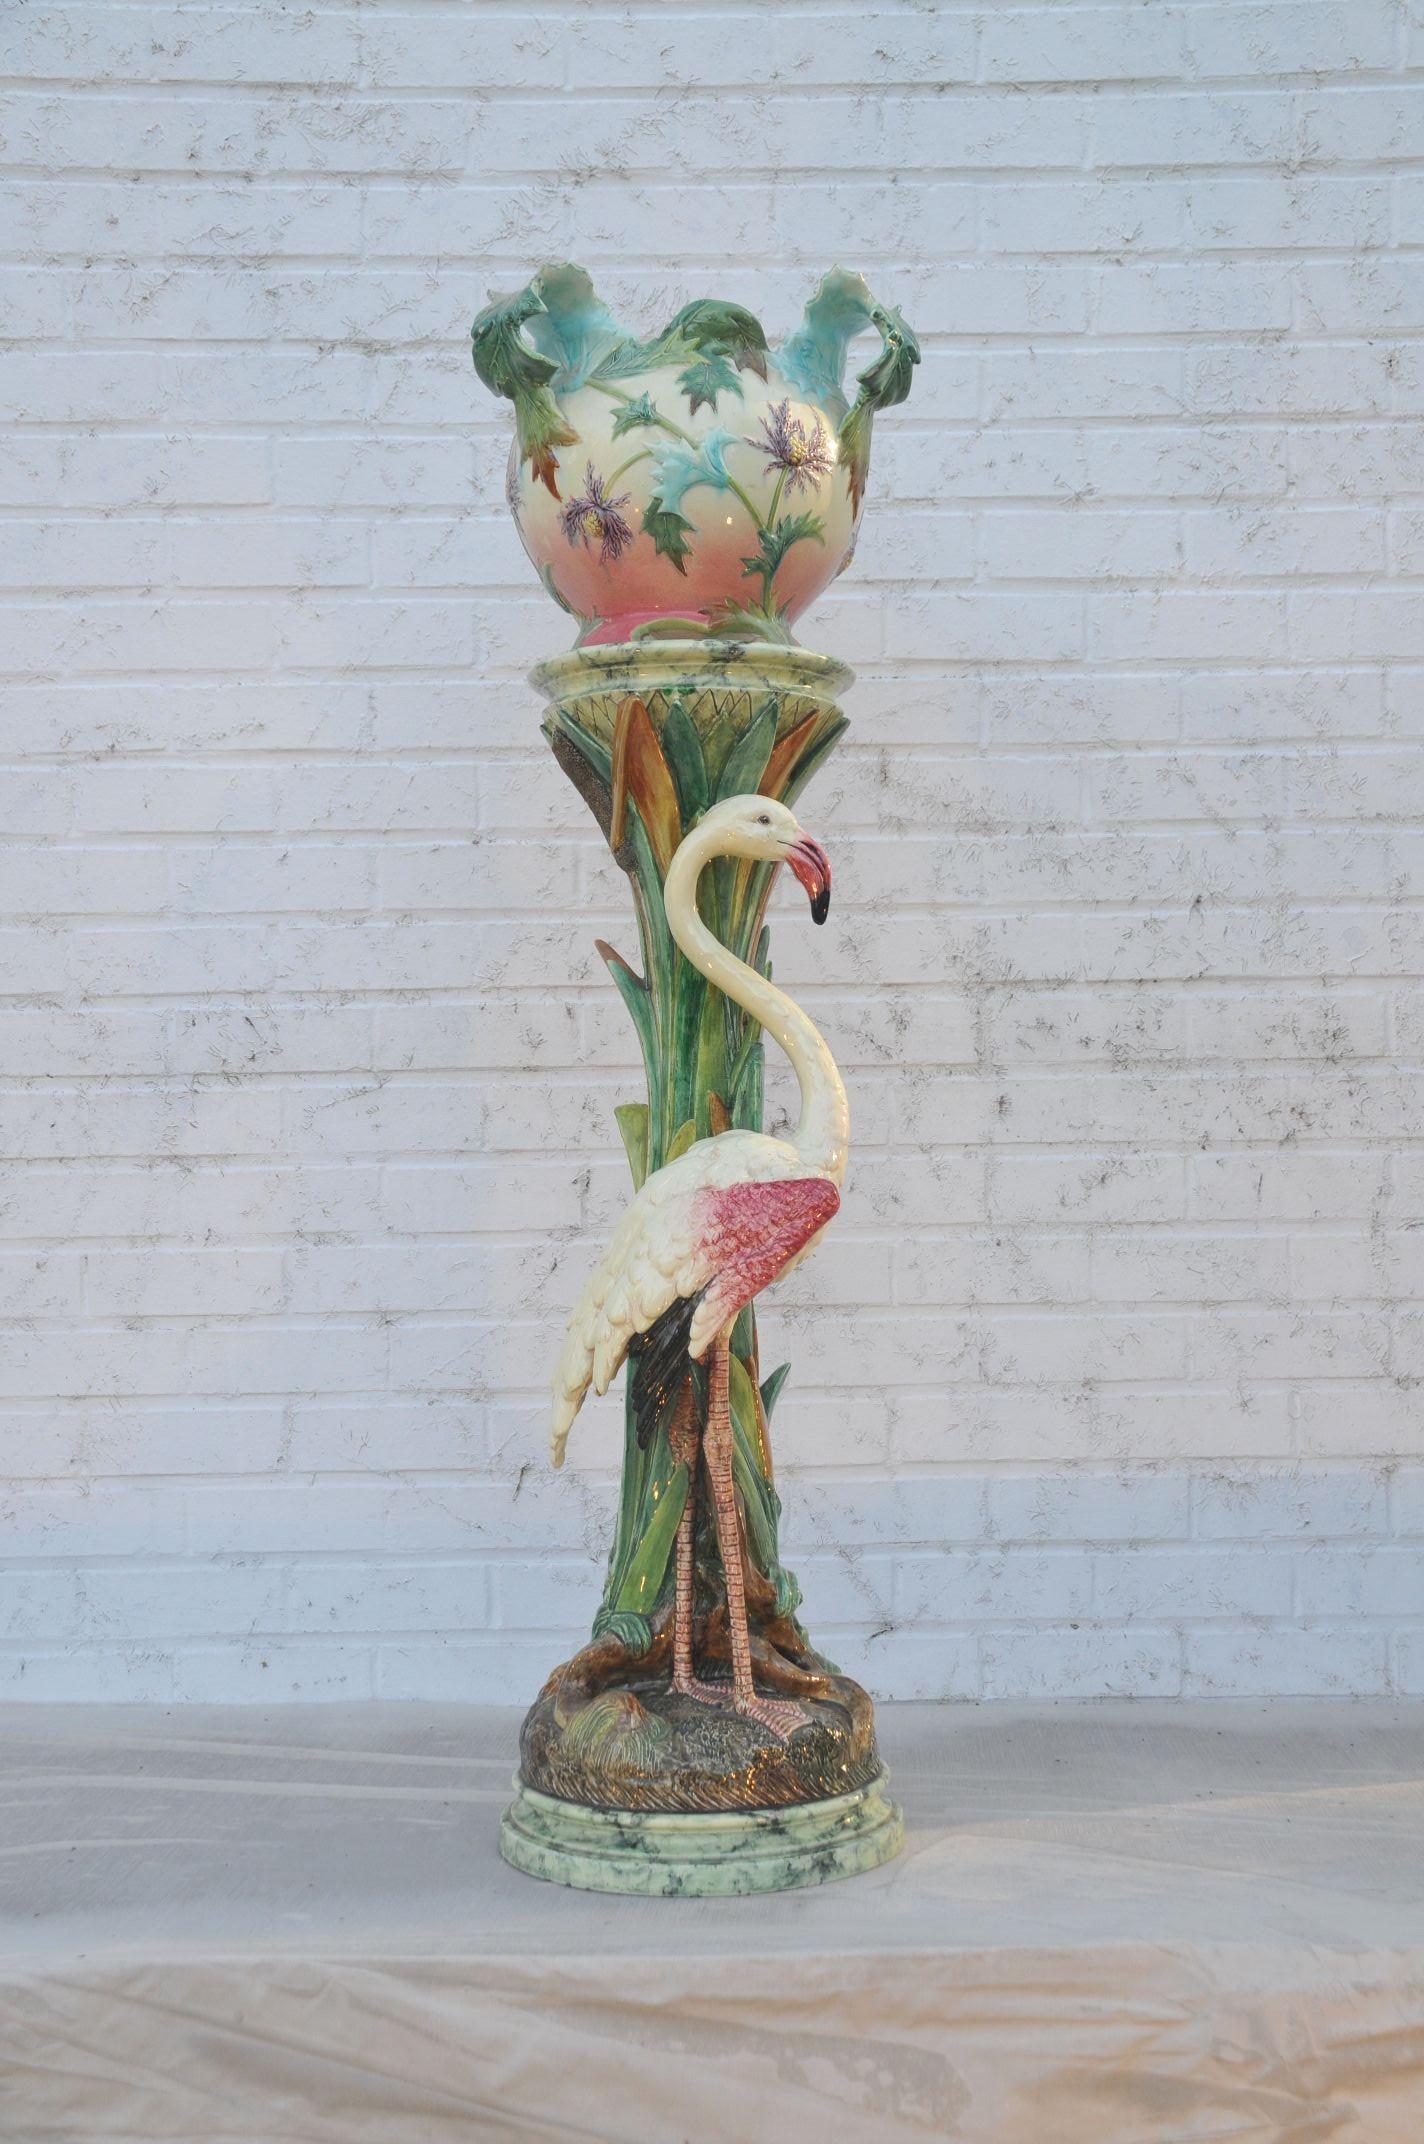 South of France, circa 1900 rare.
The circular stand decorated with a stork supporting a flower holder painted with scattered flower in relief
Both signed under the base Delphyn Massier Vallauris.
Measures: H. 124.5 cm ( 48 in.)
Condition: The